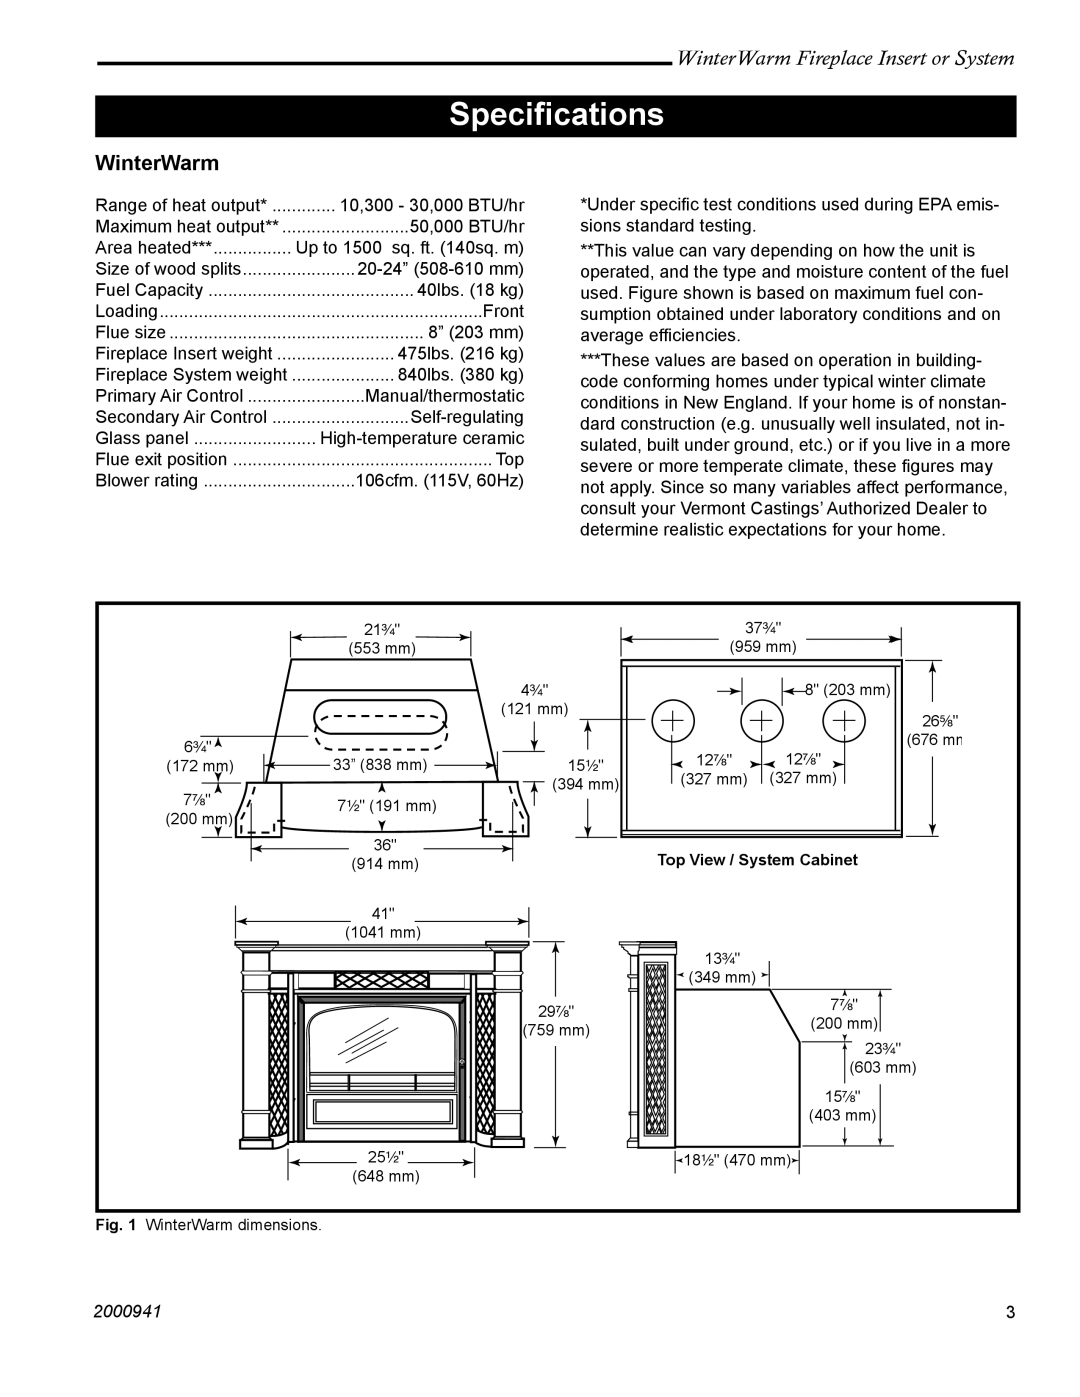 Vermont Casting WinterWarm Fireplace Insert or System installation instructions Speciﬁcations, 2000941 